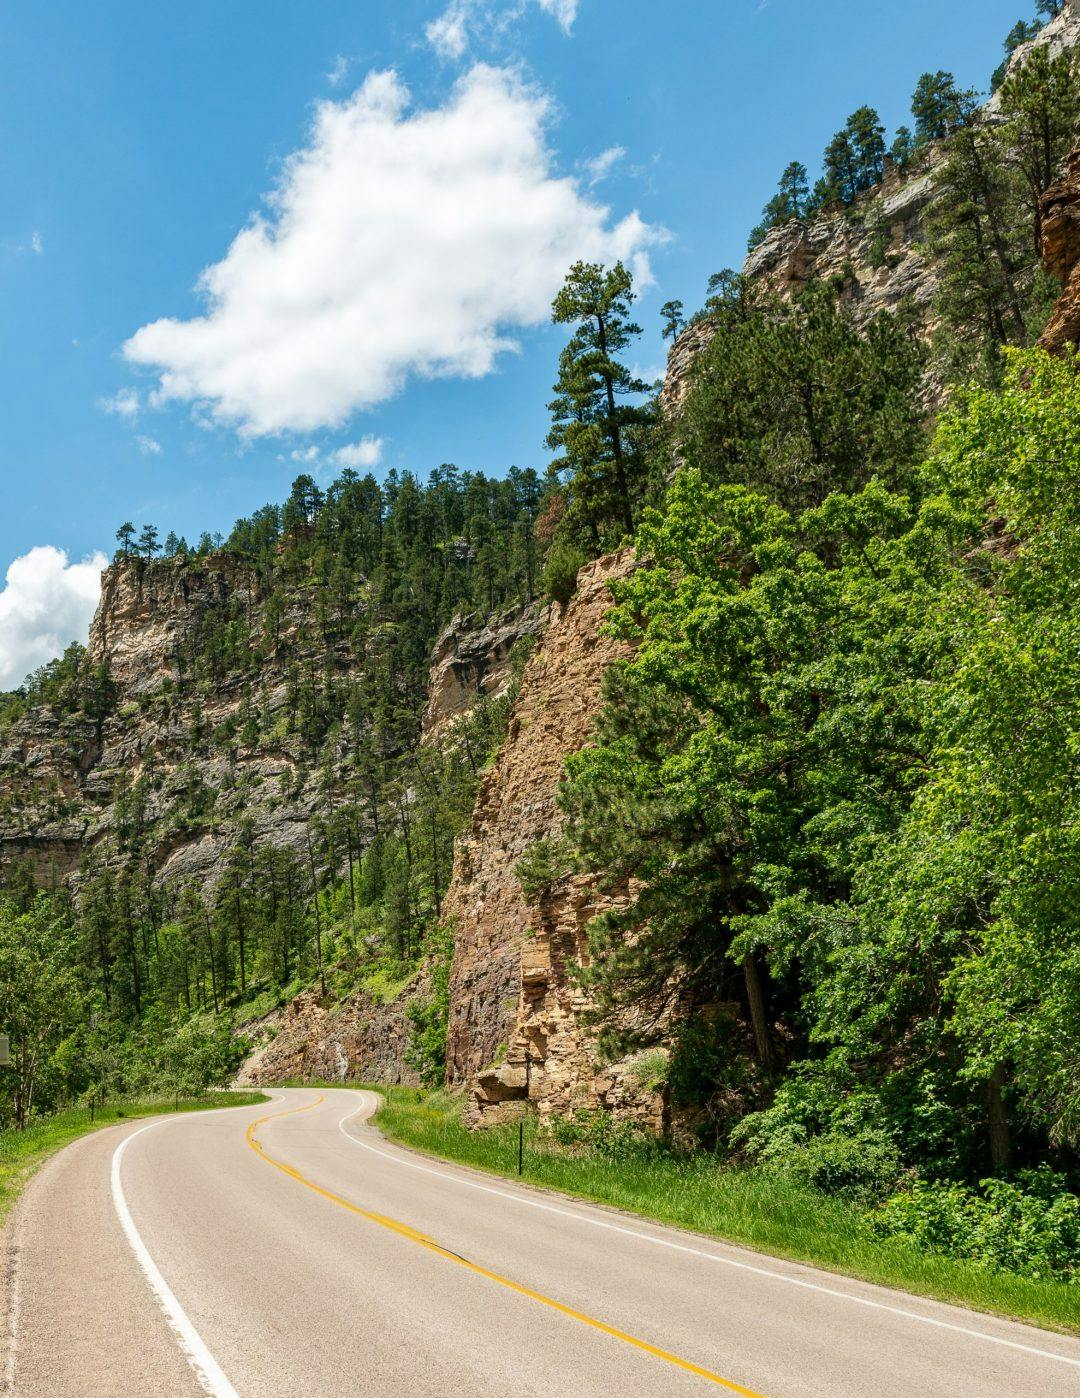 A winding road through the mountains in Rapid City